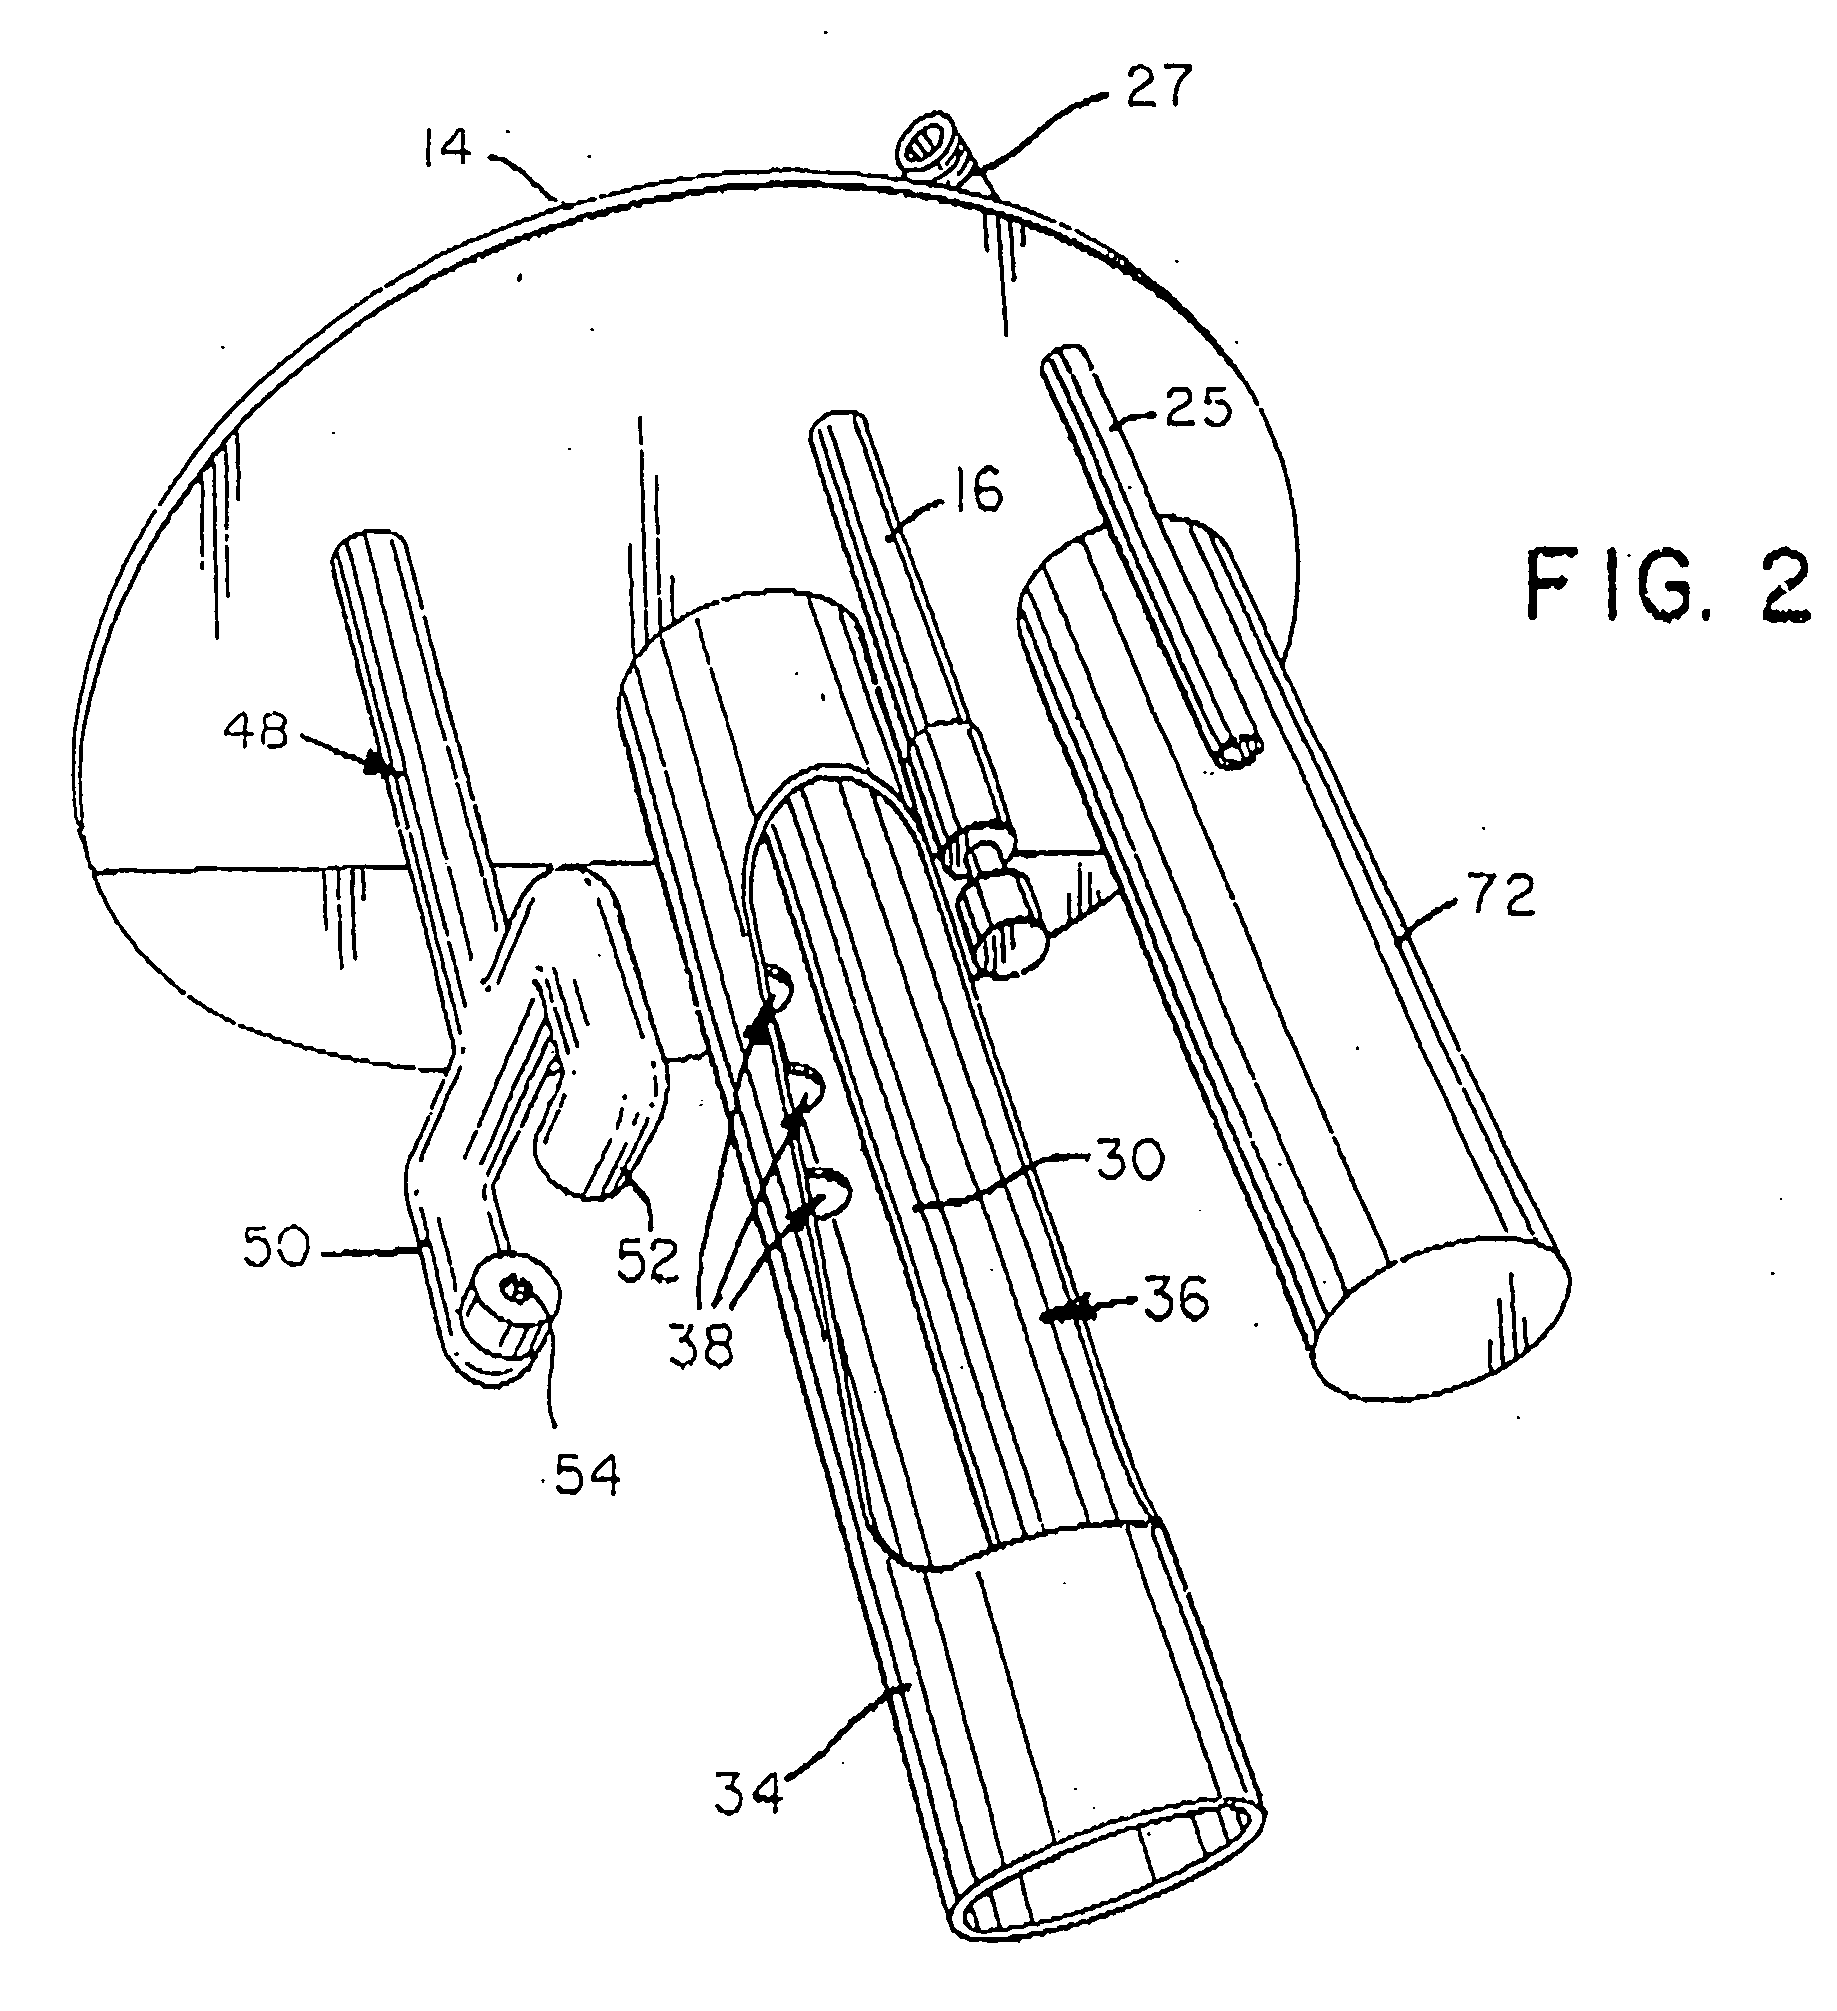 Apparatus for dissolving a solid material in a liquid